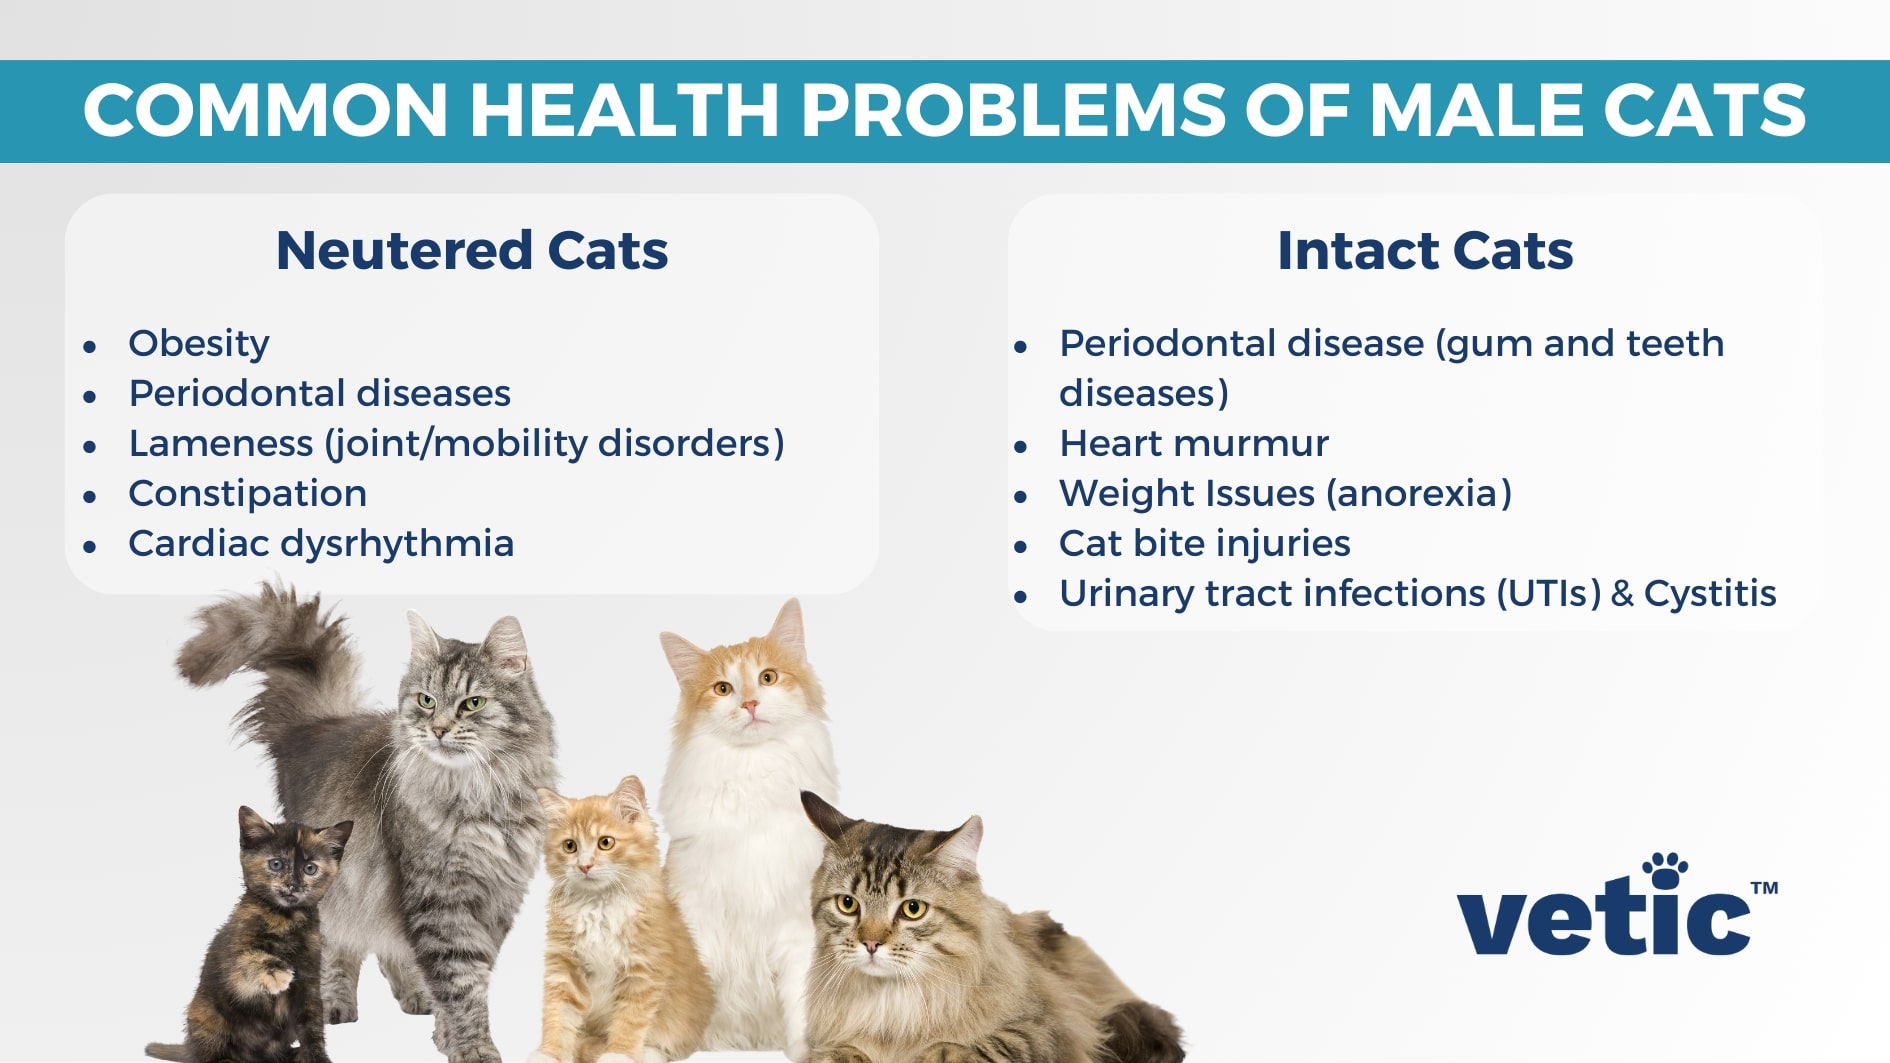 Infographic chart titled "Common Health Problems of Male Cats" with two subheads - common cat health problems in intact cats and neutered cats